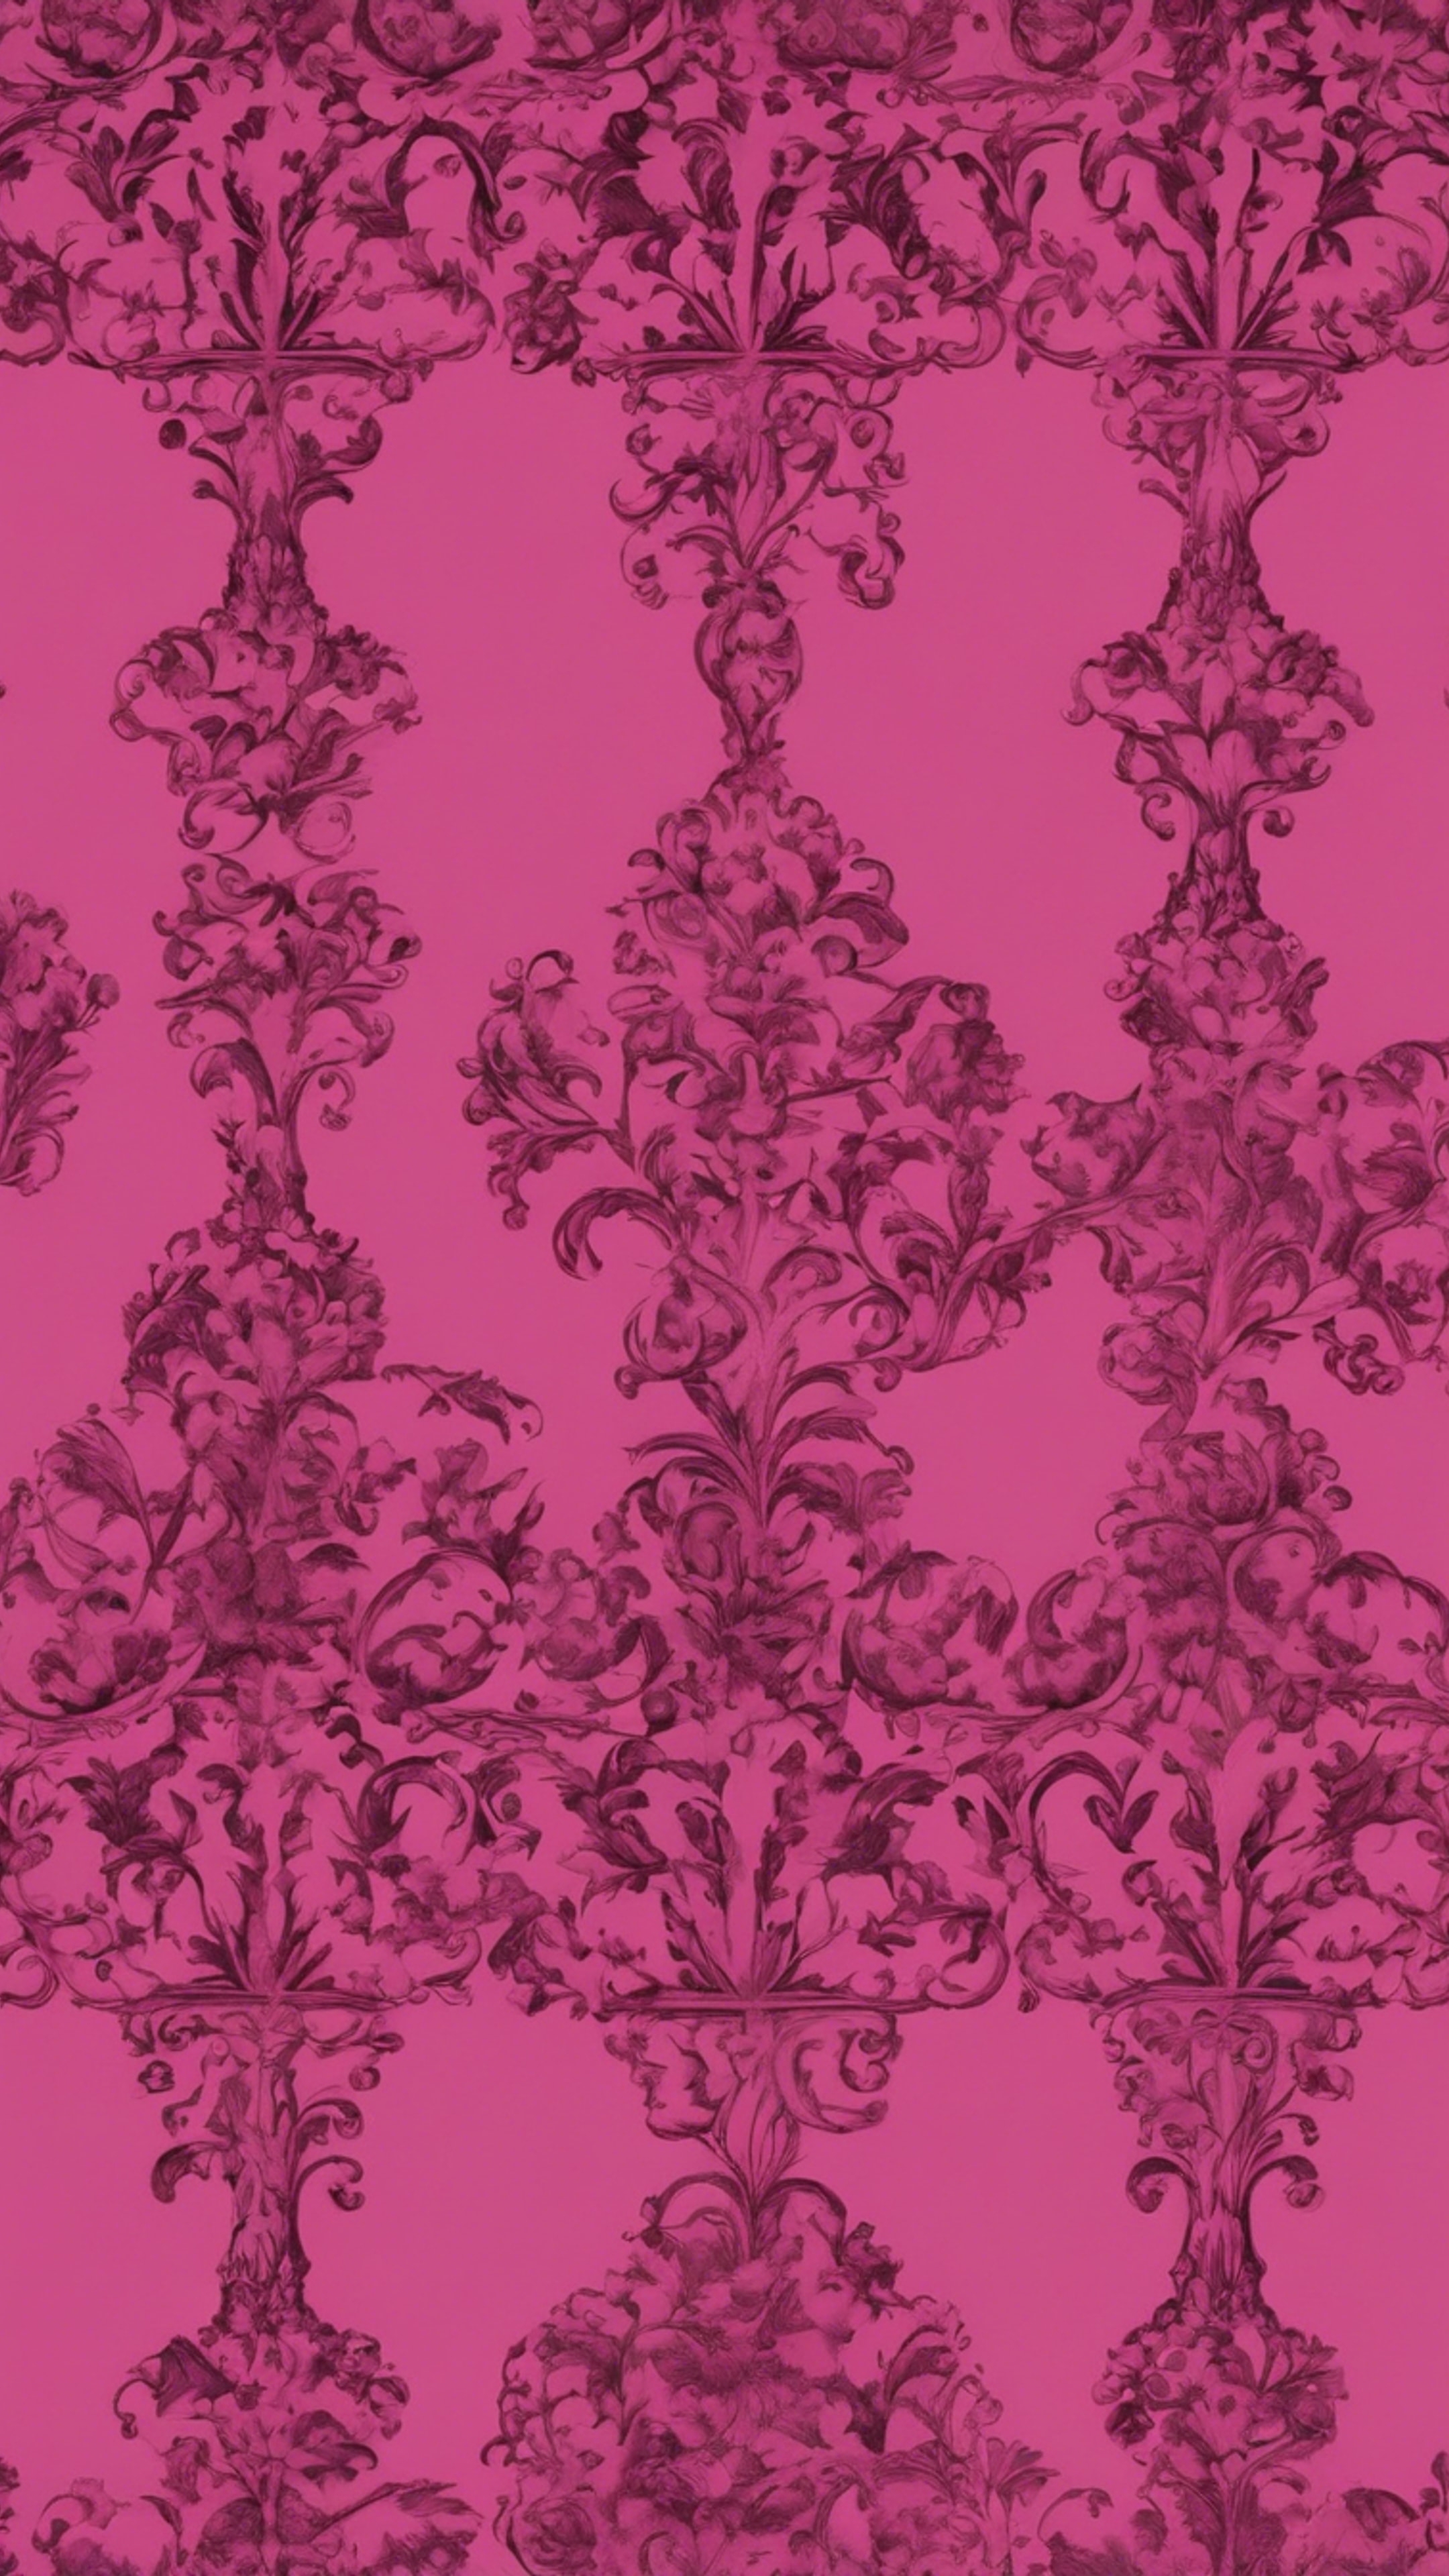 A dark pink Gothic background with baroque patterns. Tapeta[5770fecf2152499e8904]